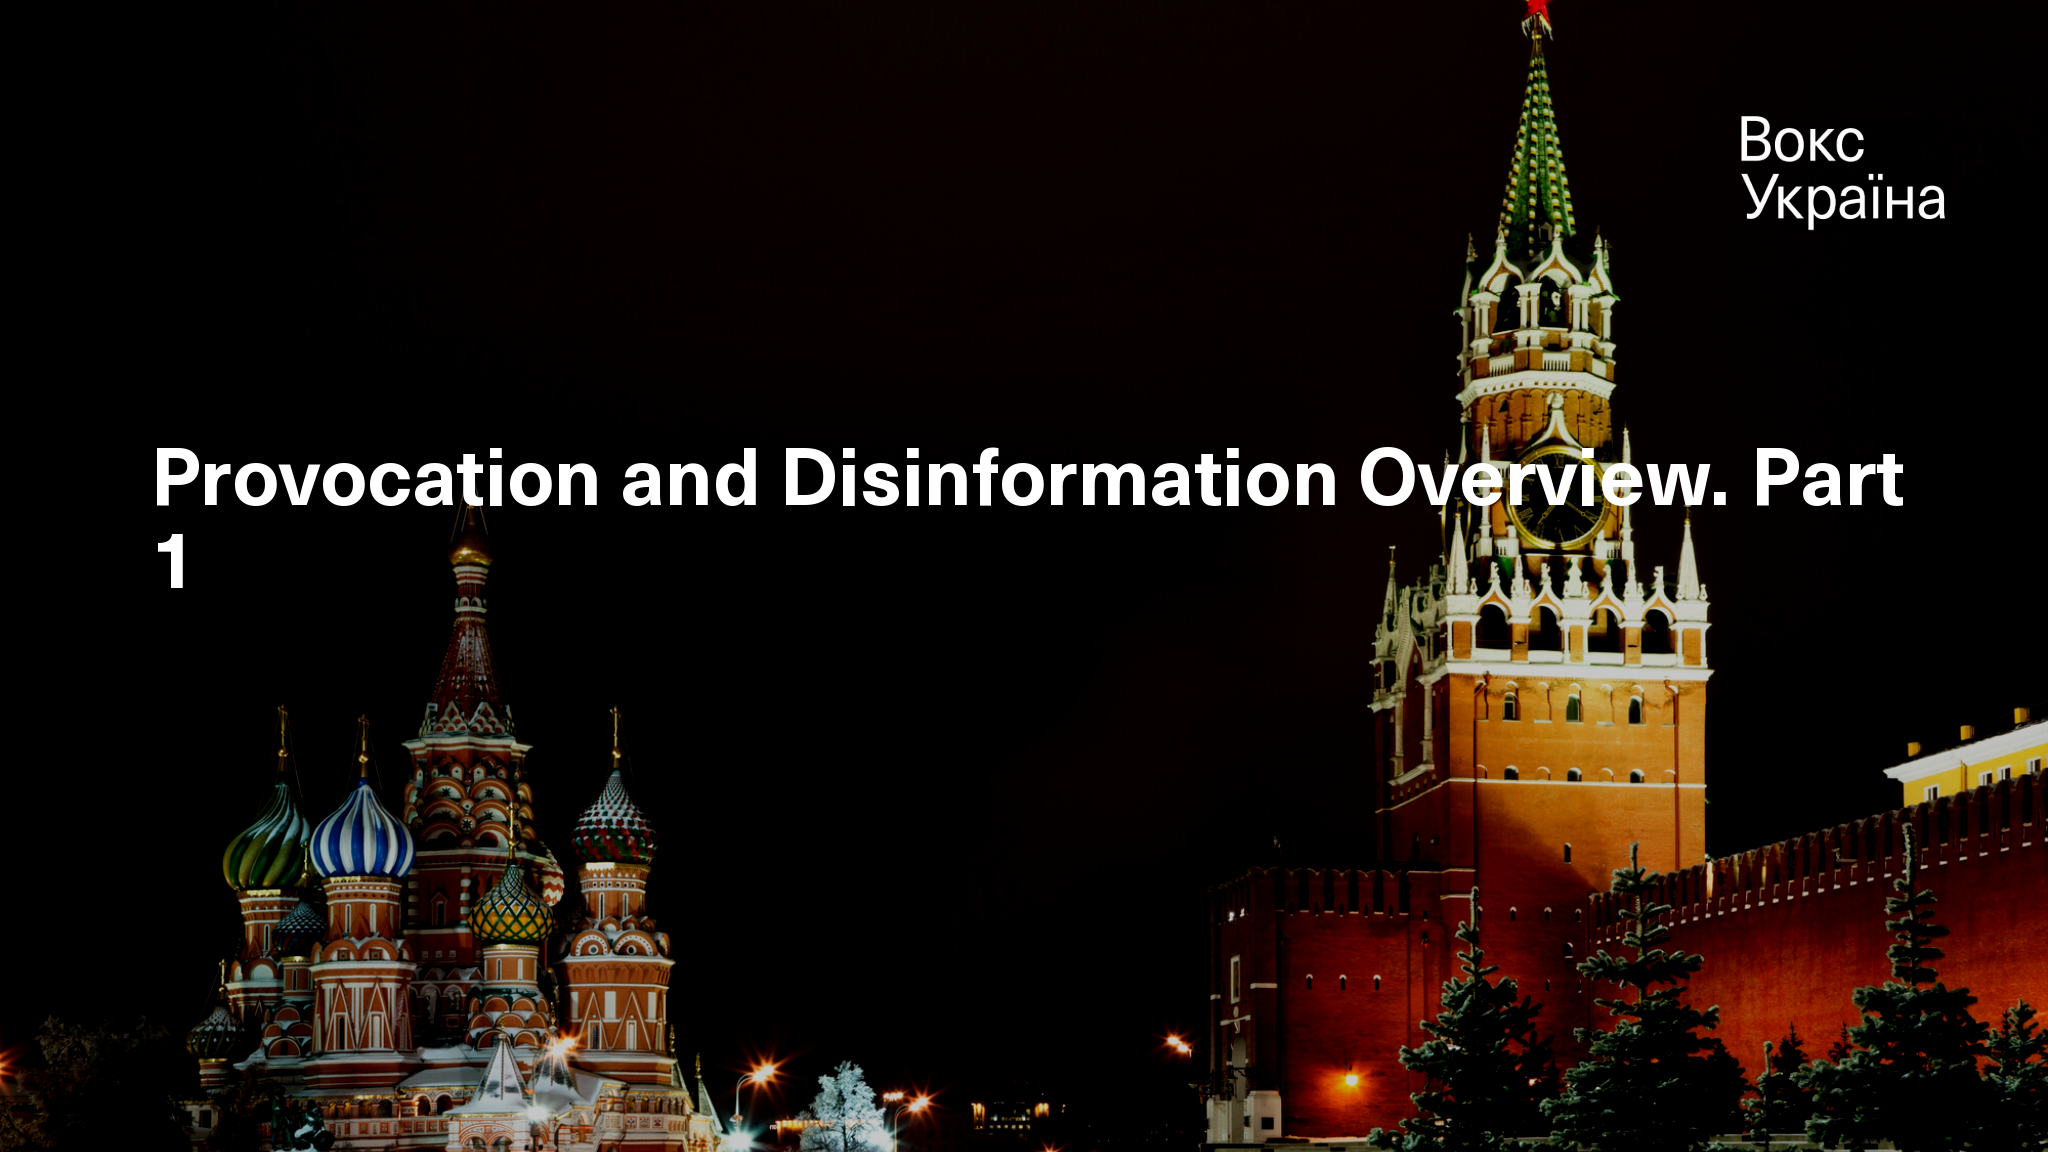 Provocation and Disinformation Overview. Part 1